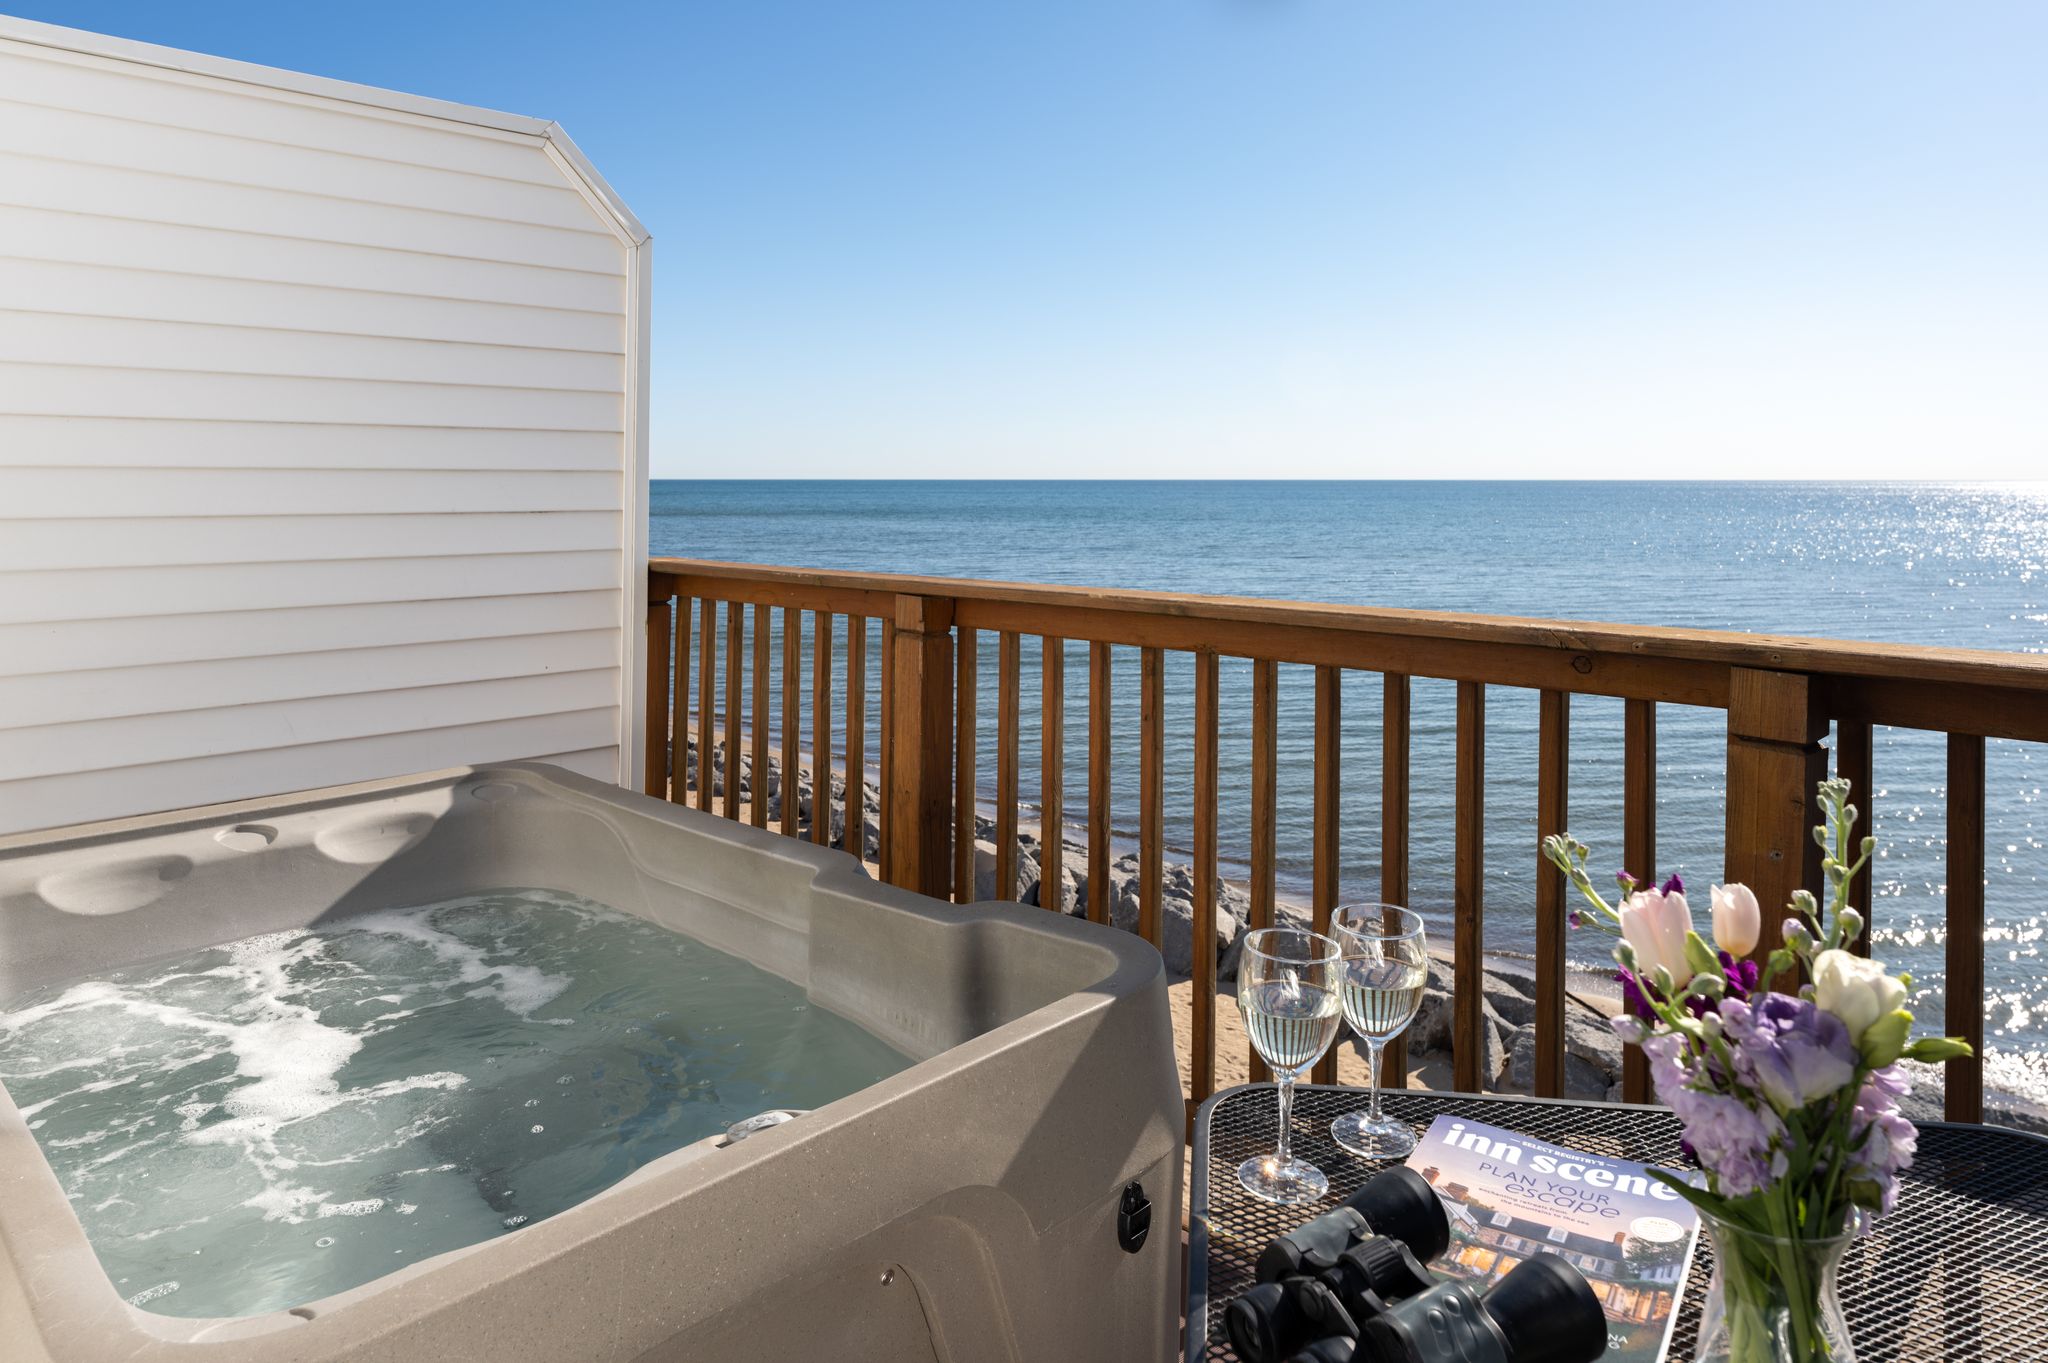 Private hot tub on outdoor deck